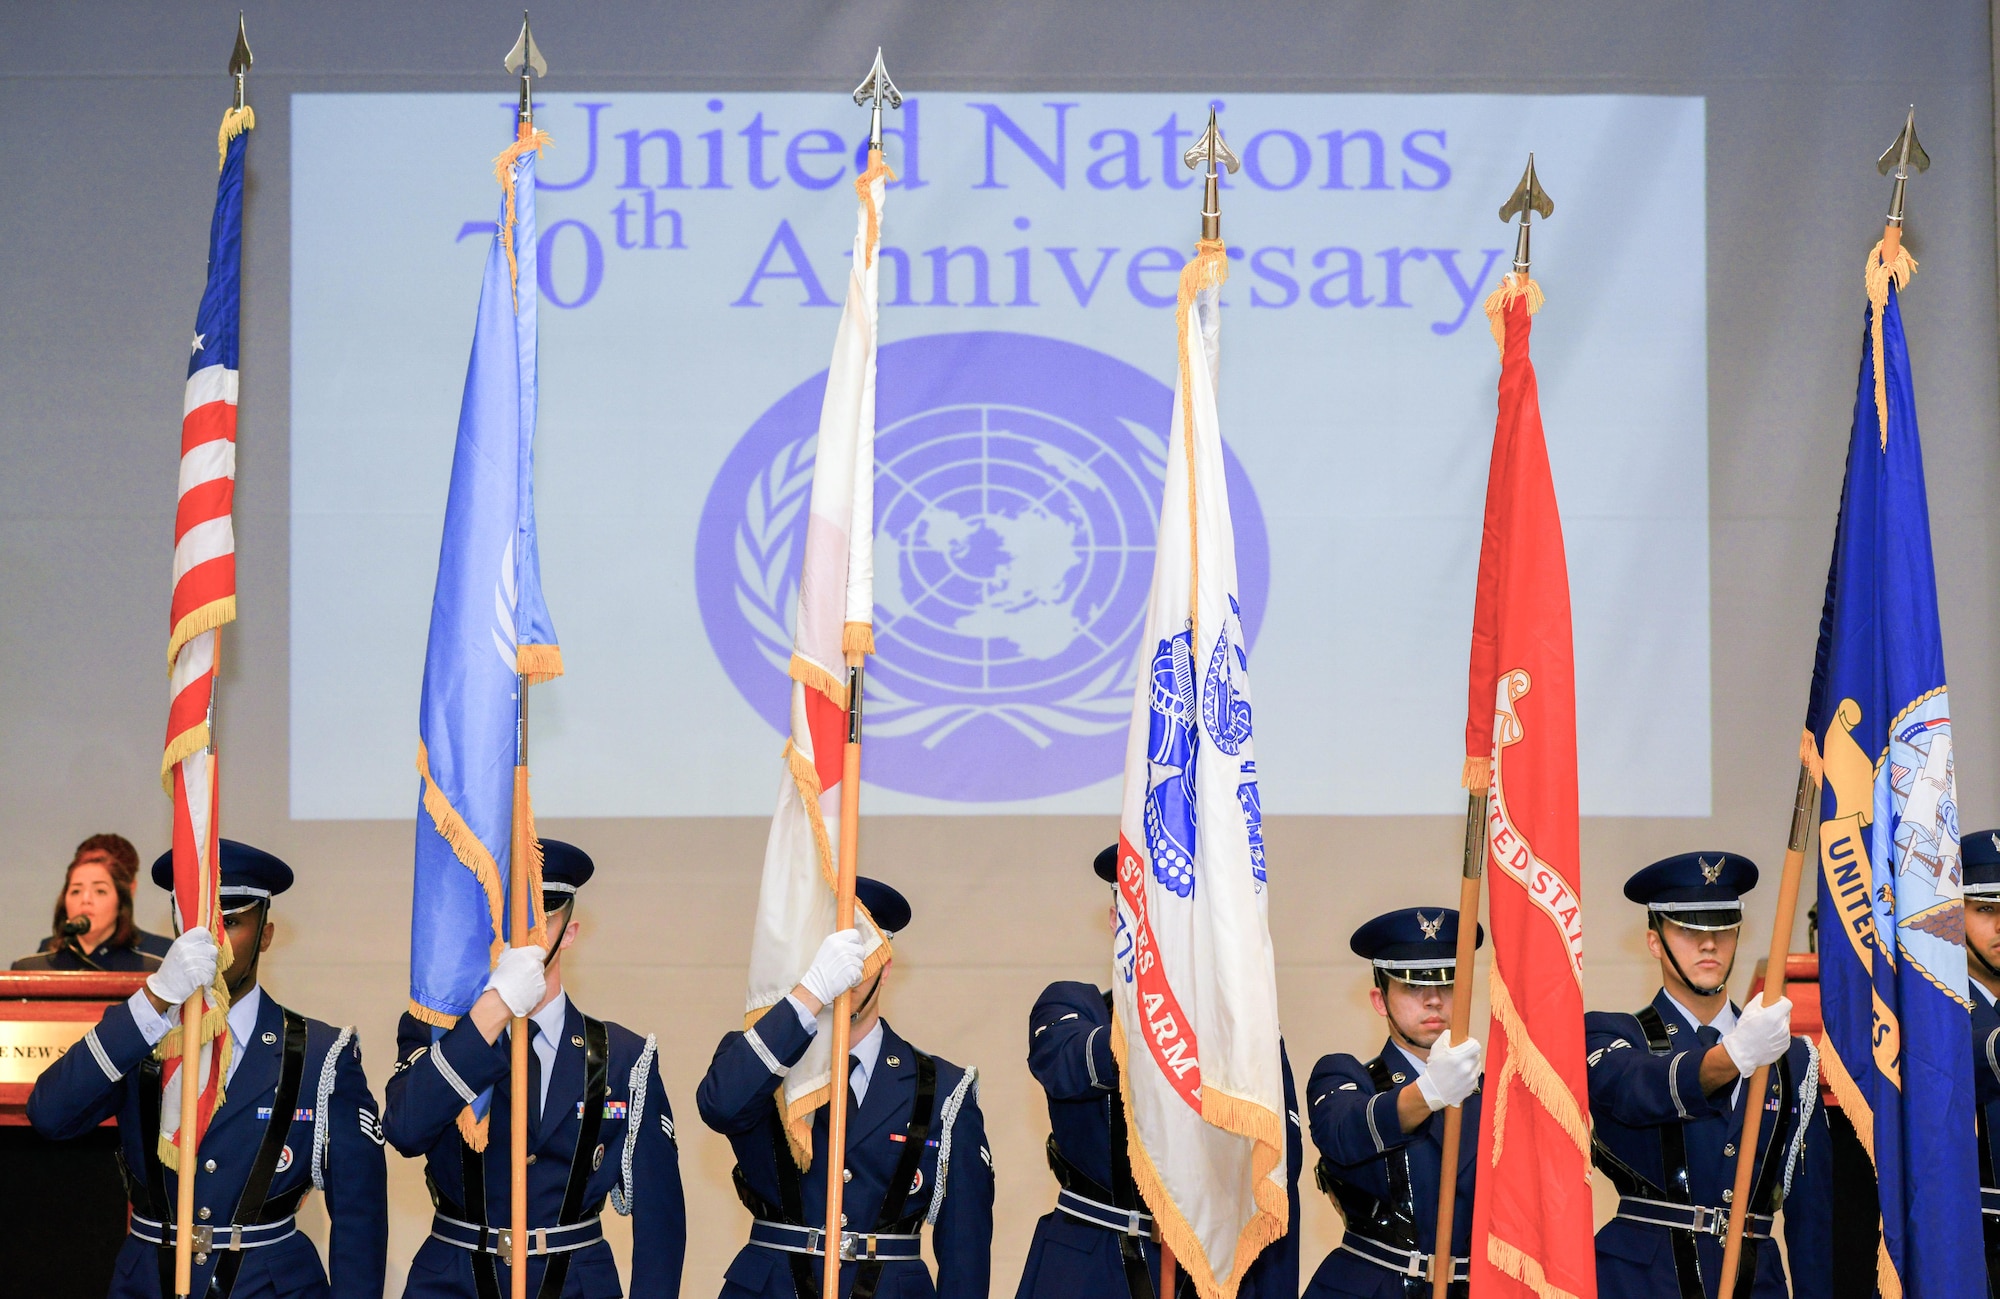 Members of the Yokota Air Base honor guard present the colors during the United Nations Day 70th Anniversary Celebration in Tokyo, Japan, Nov. 16, 2015. UN Day commemorates the anniversary of the entry into force of the United Nations Charter in 1945 and has been celebrated as UN Day since 1948. The day also provides an opportunity for the UNC, a unified command structure for the multinational military forces supporting South Korea, to show its appreciation for the ongoing support from sending states, supporting organizations and Japan, and to reinforce the value to regional security and stability. Attendees include ambassadors, diplomats, members of the Japanese Ministry of Foreign Affairs and Ministry of Defense, Japanese Self-Defense Forces and United States Forces, Japan, senior military officers. (U.S. Air Force photo by Airman 1st Class Elizabeth Baker/Released) 
11/18/2015 - Gen. Michael Scaparrotti, United Nations Command commander, right, and a UN reception attendee, left, cut a cake during the UN Day 70th Anniversary Celebration in Tokyo, Japan, Nov. 16, 2015. The day provides an opportunity for the UNC, a unified command structure for the multinational military forces supporting South Korea, to show its appreciation for the ongoing support from sending states, supporting organizations and Japan, and to reinforce the value to regional security and stability. Attendees include ambassadors, diplomats, members of the Japanese Ministry of Foreign Affairs and Ministry of Defense, Japanese Self-Defense Forces and United States Forces, Japan, senior military officers. (U.S. Air Force photo by Airman 1st Class Elizabeth Baker/Released)